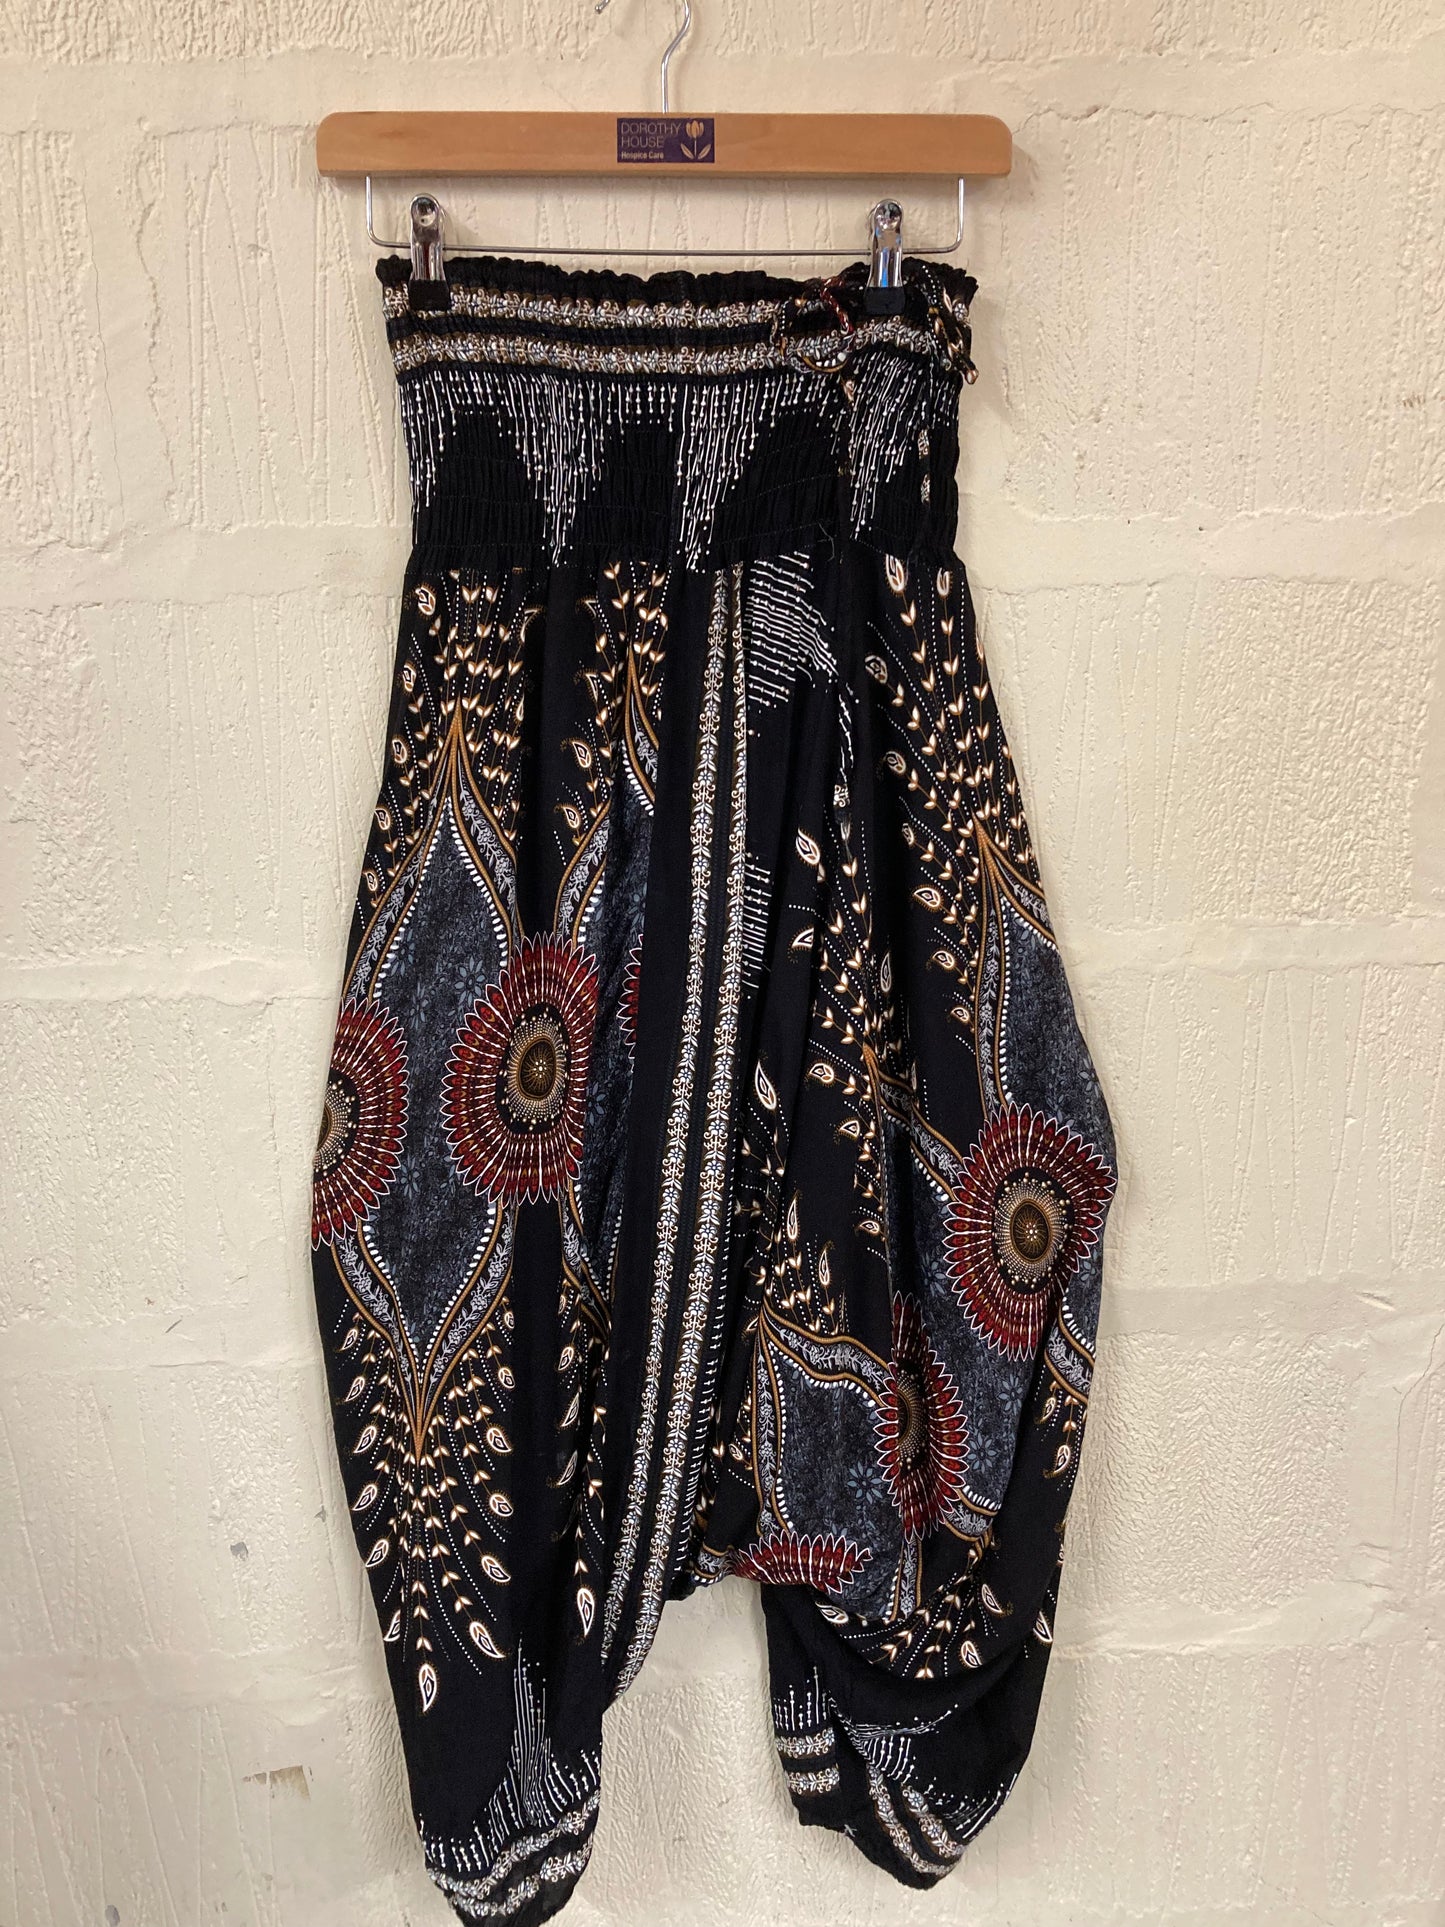 00s Black with White, Red and Gold Pattern Harem Pants  Size 10